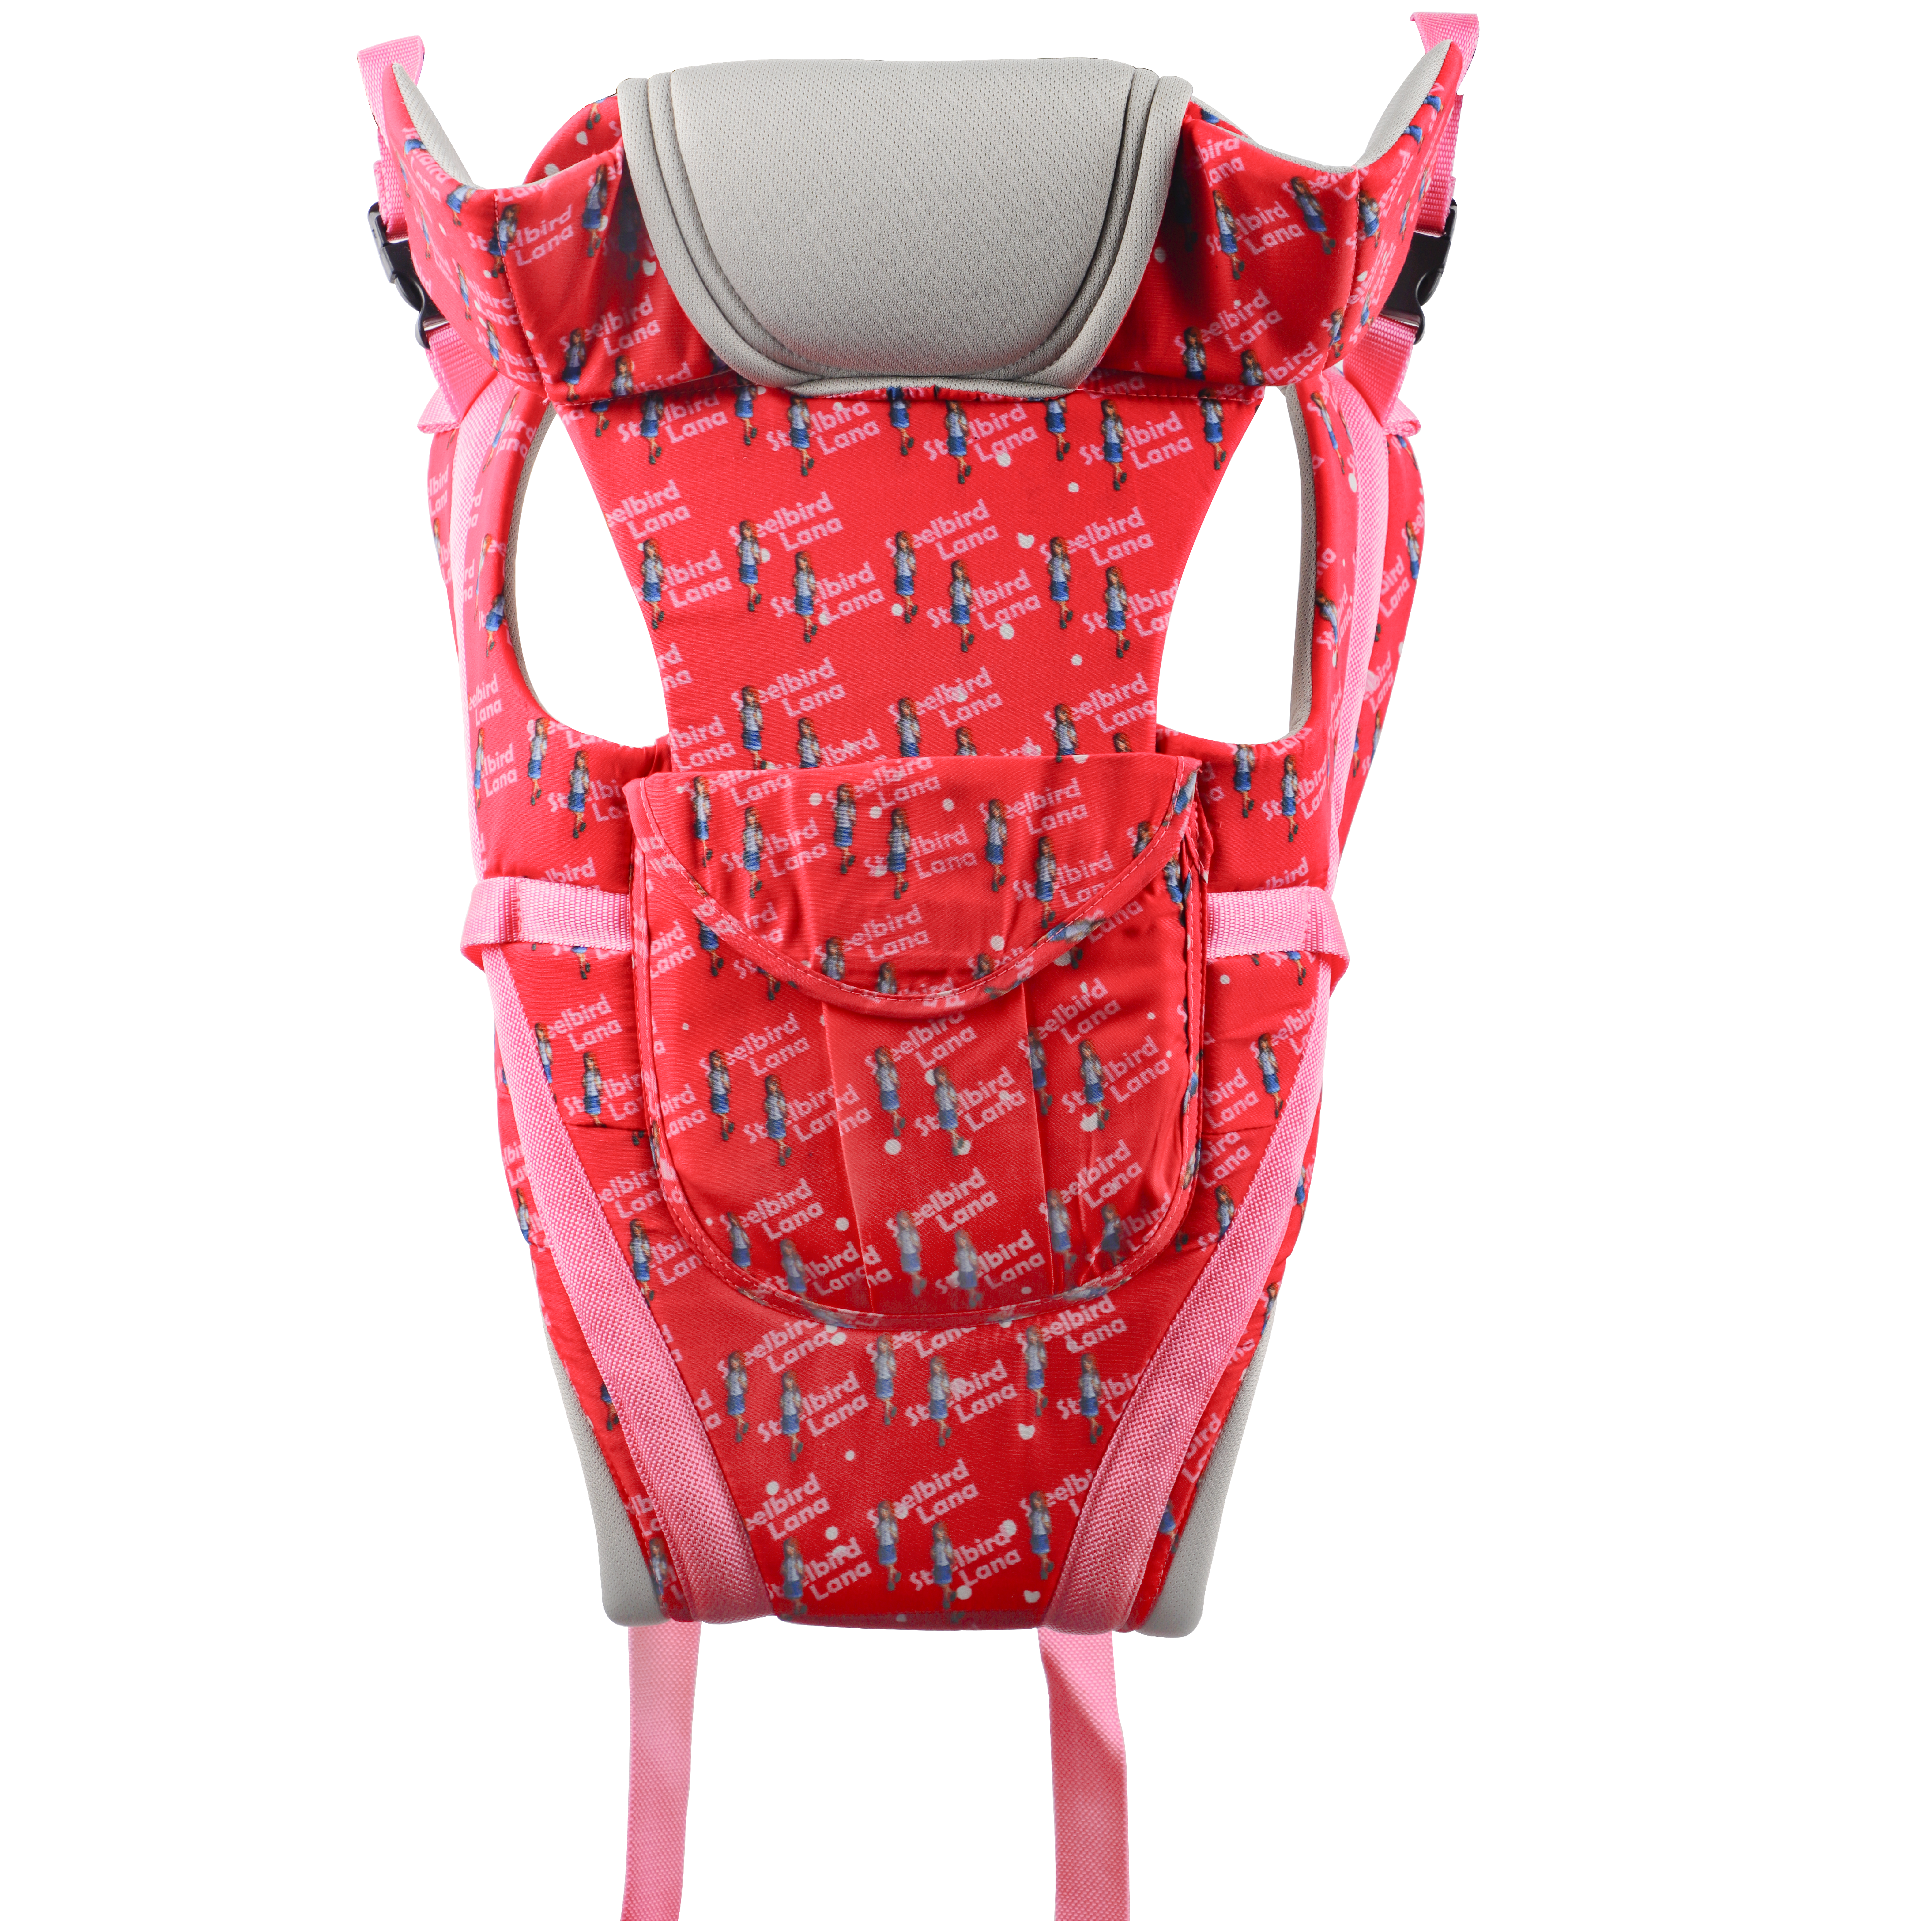 Steelbird Premium Kids 4-in-1 Adjustable Baby Carrier Cum Kangaroo Bag With Lumbar Support-Lightweight And Breathable-Back-Front Carrier For Baby With Safety Belt-Max Weight Up To 15 Kg (Pink Lana)